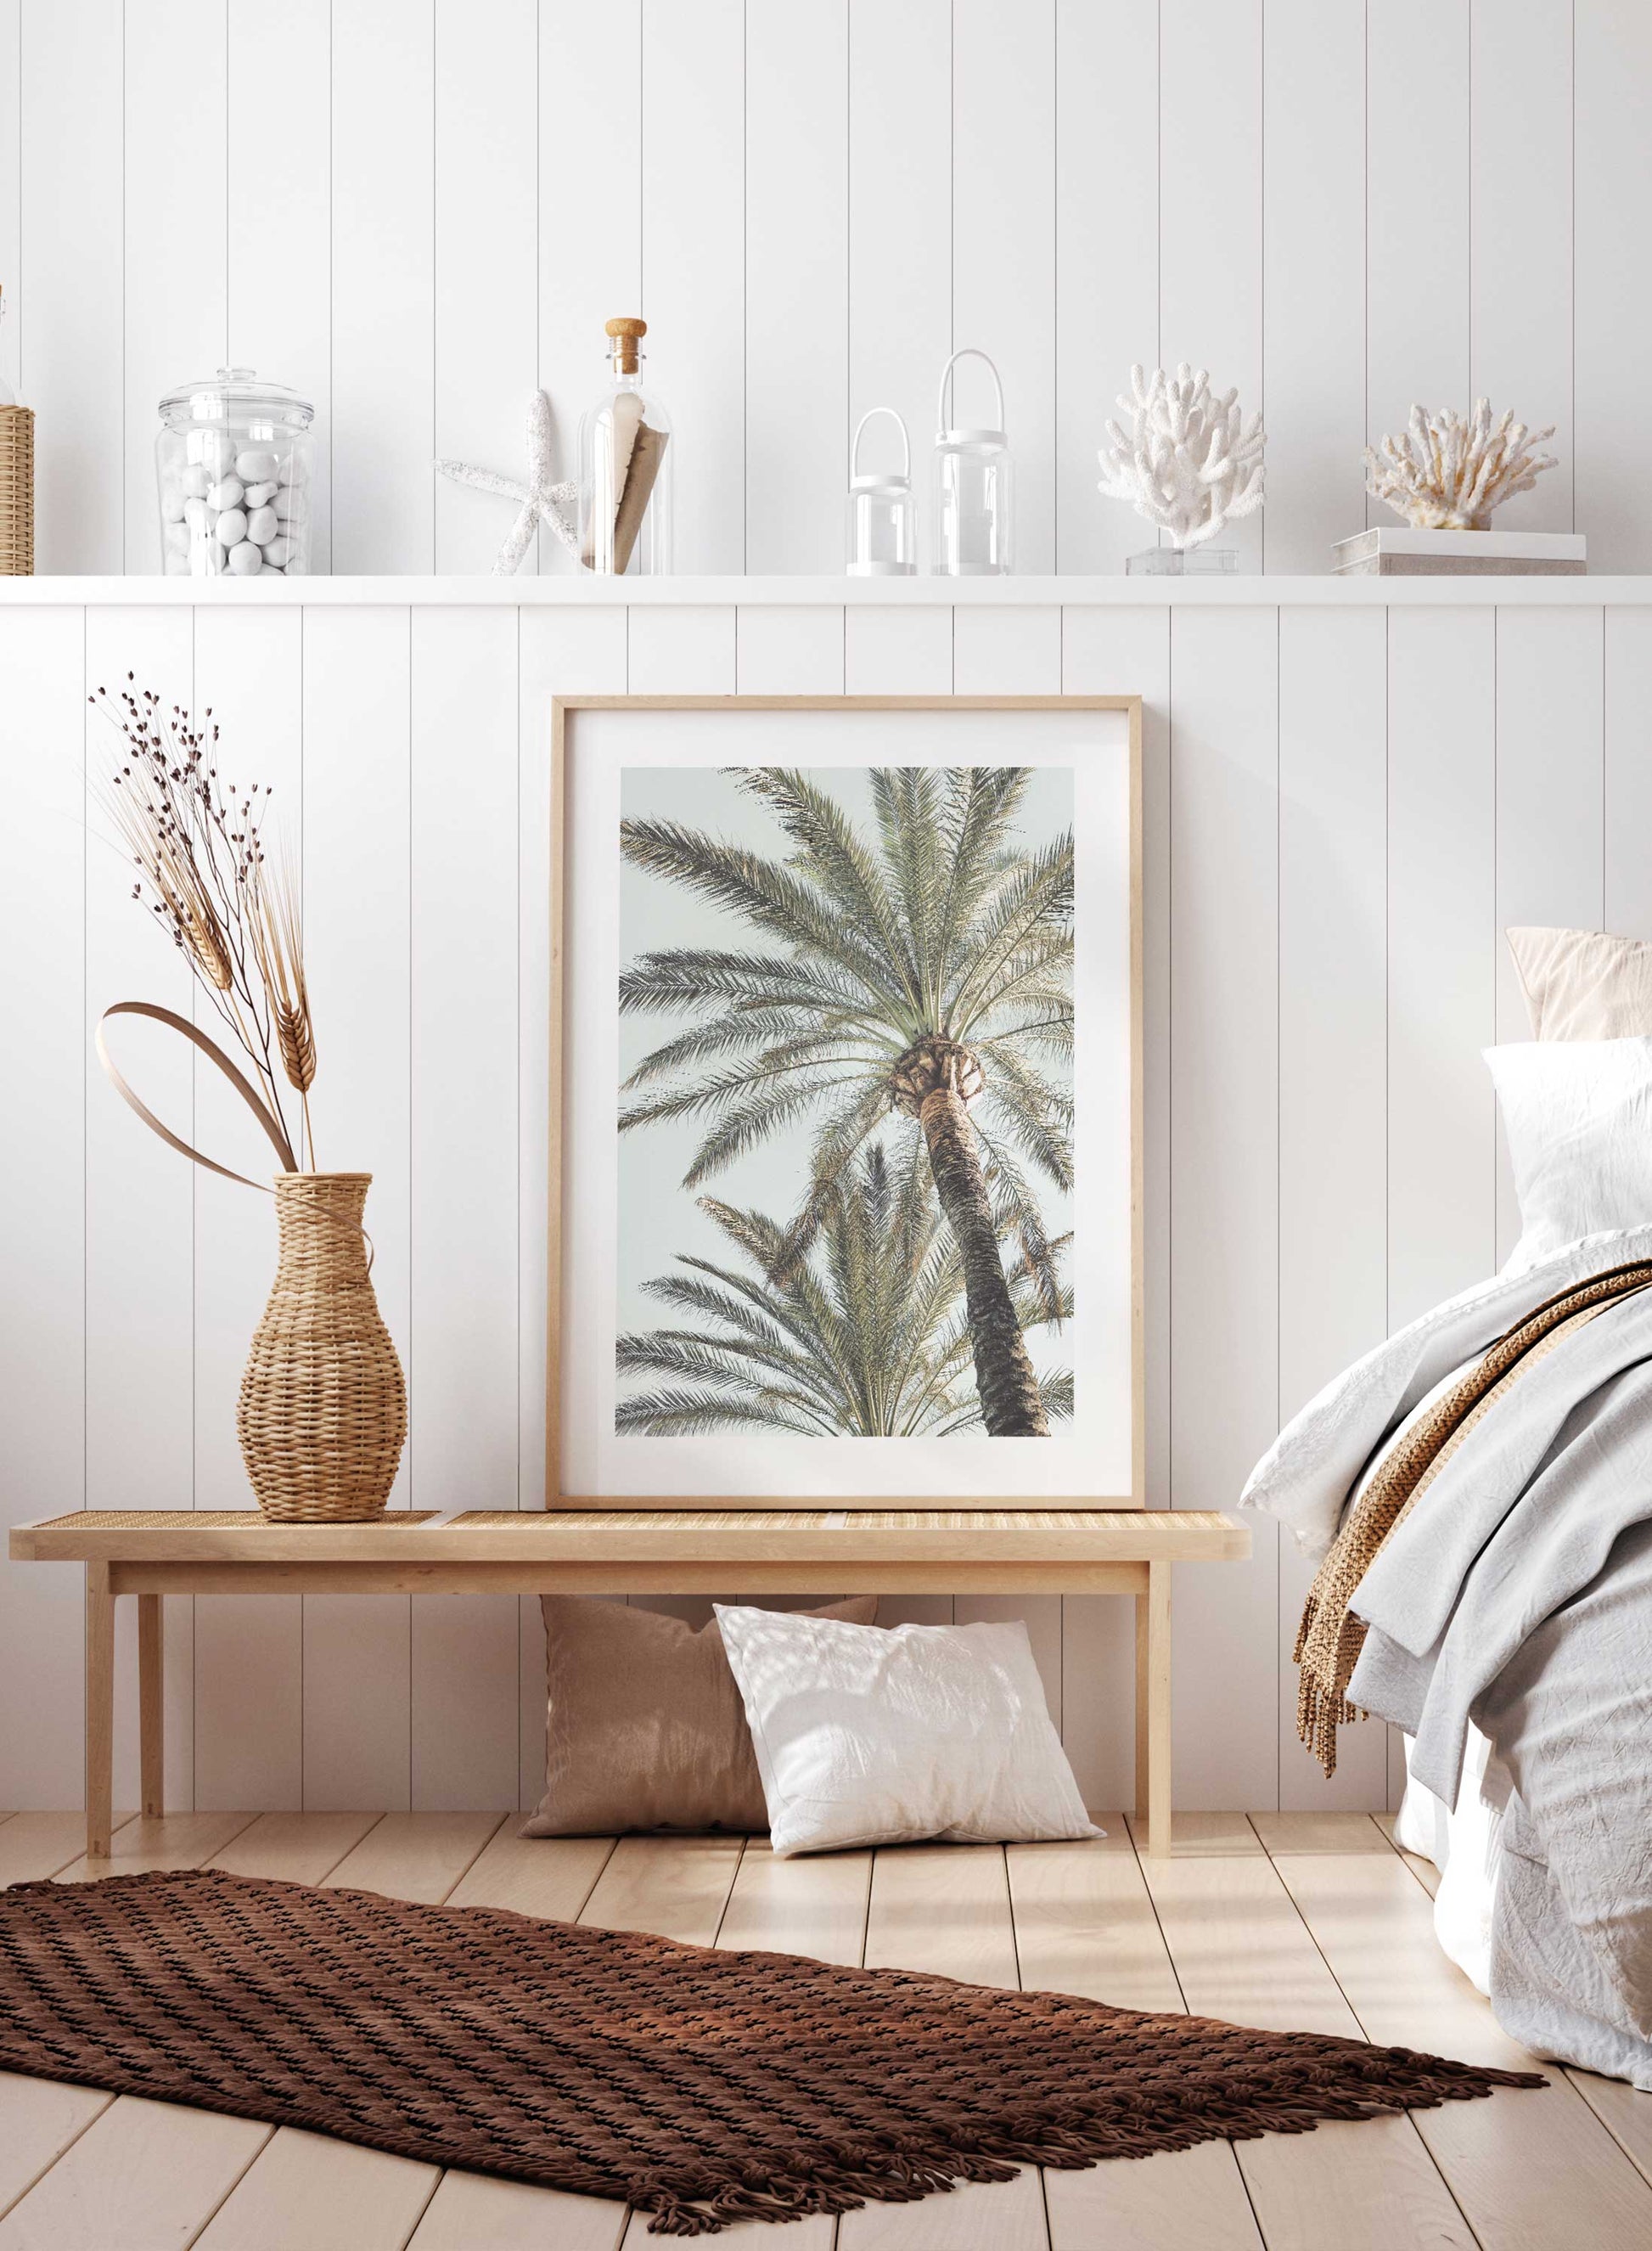 Below the Palms | Shop Posters & Prints Online at Opposite Wall